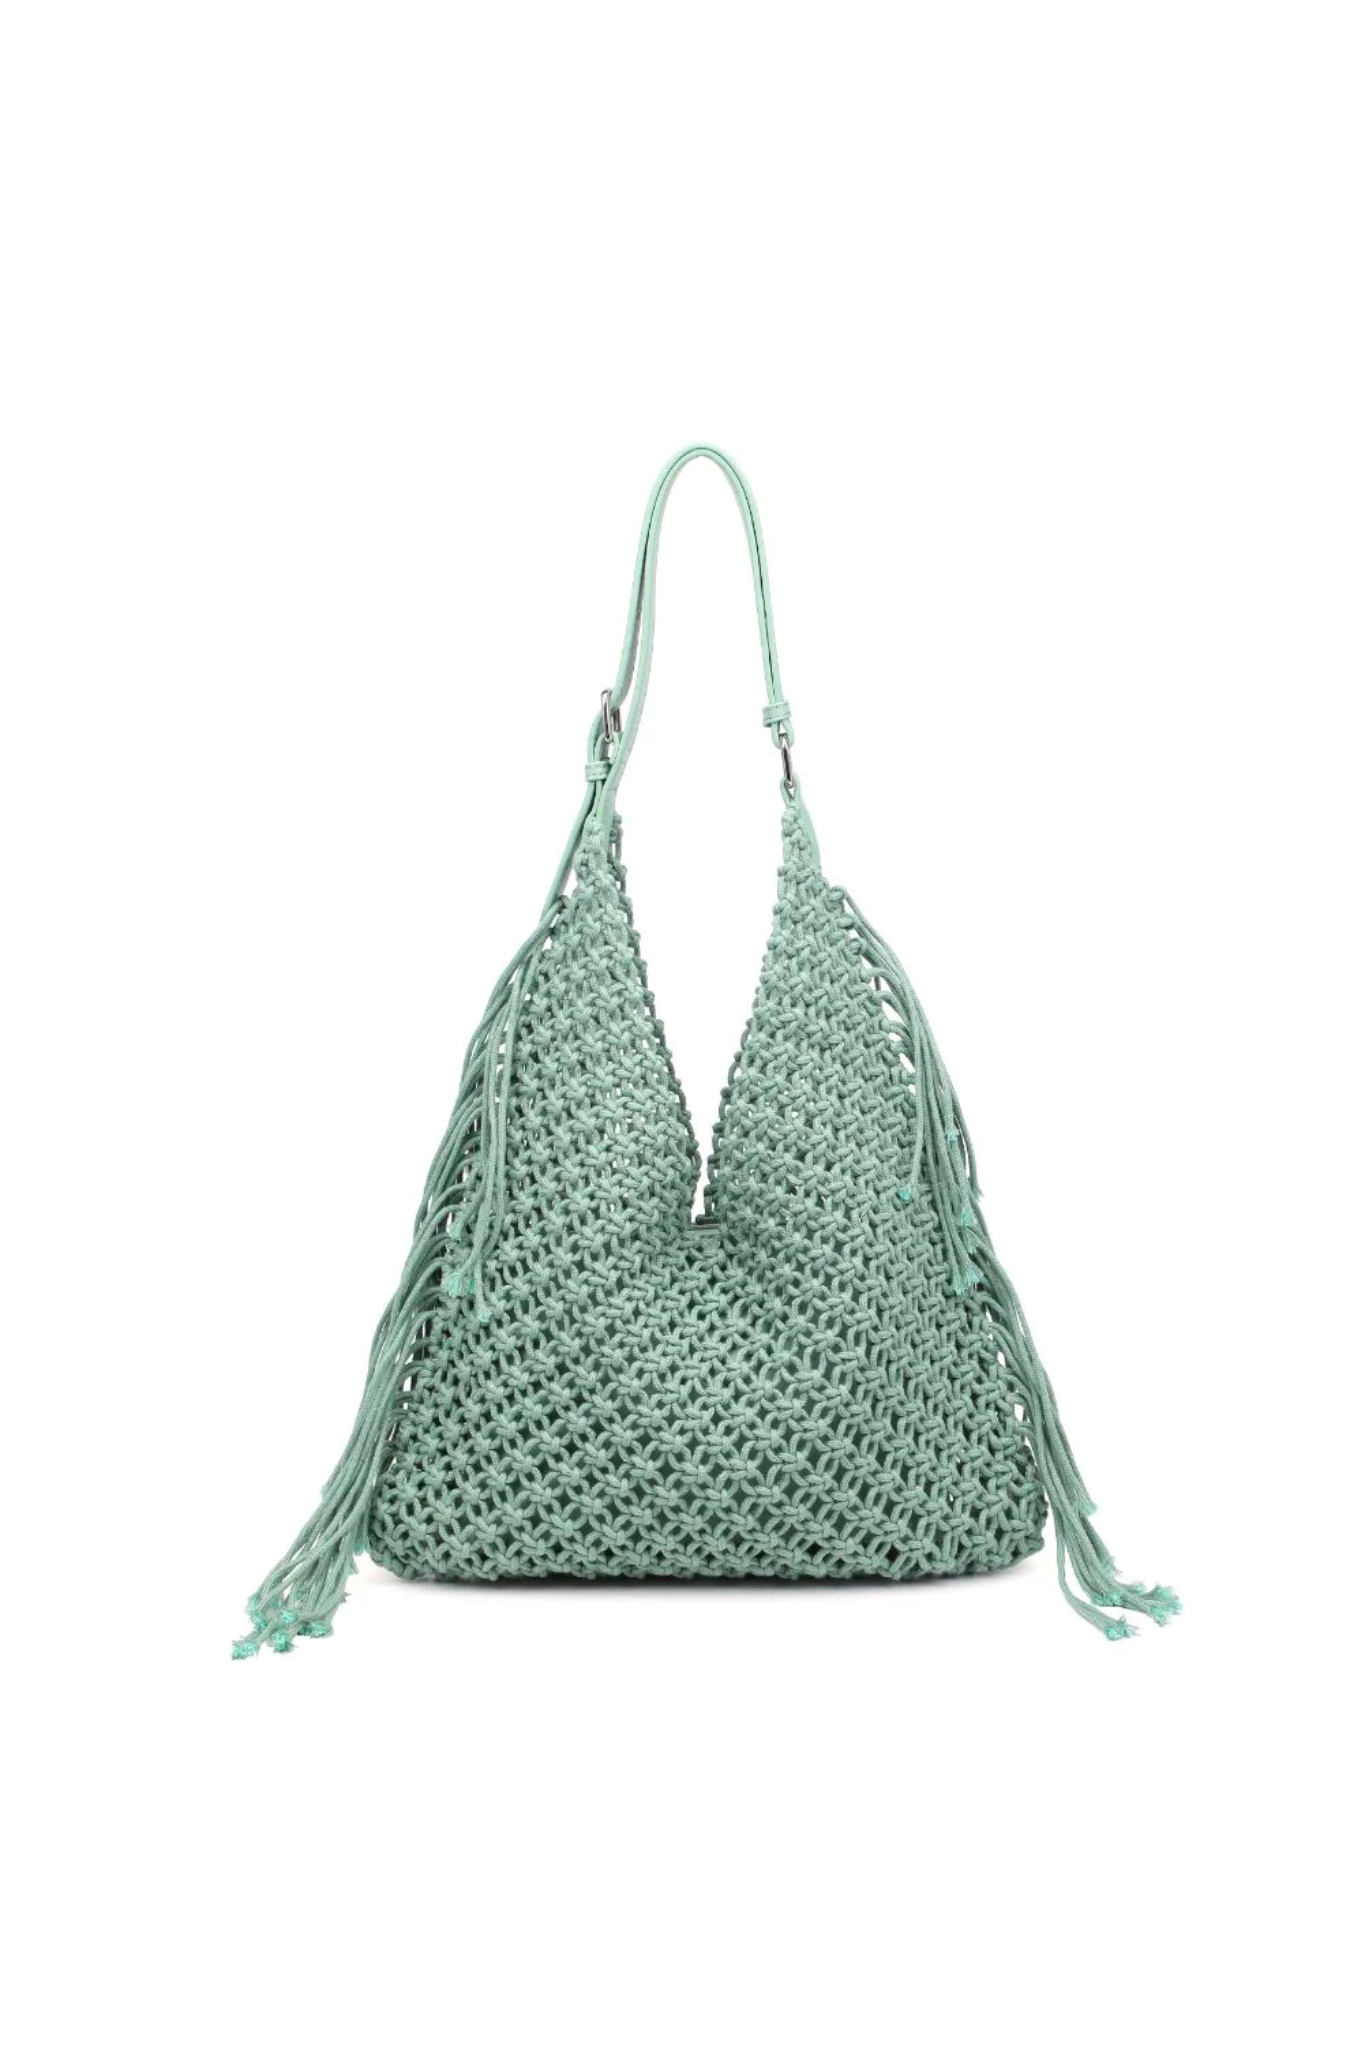 View 2 of Ariel Crochet Hobo Bag in Sage, a Bags from Larrea Cove. Detail: .